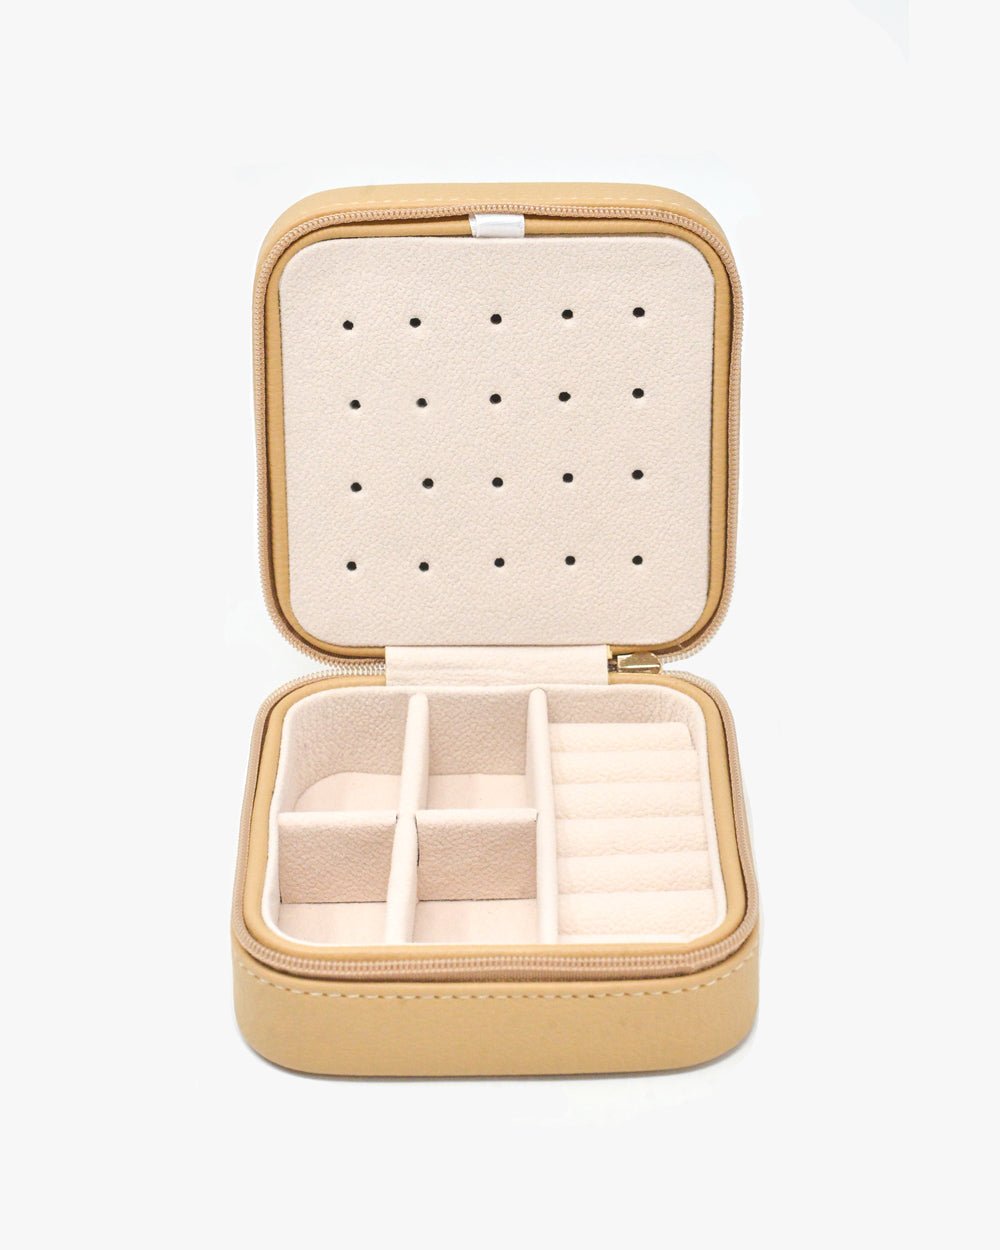 CUPCAKES AND CASHMERE JEWELRY CASE - Shop Cupcakes and Cashmere